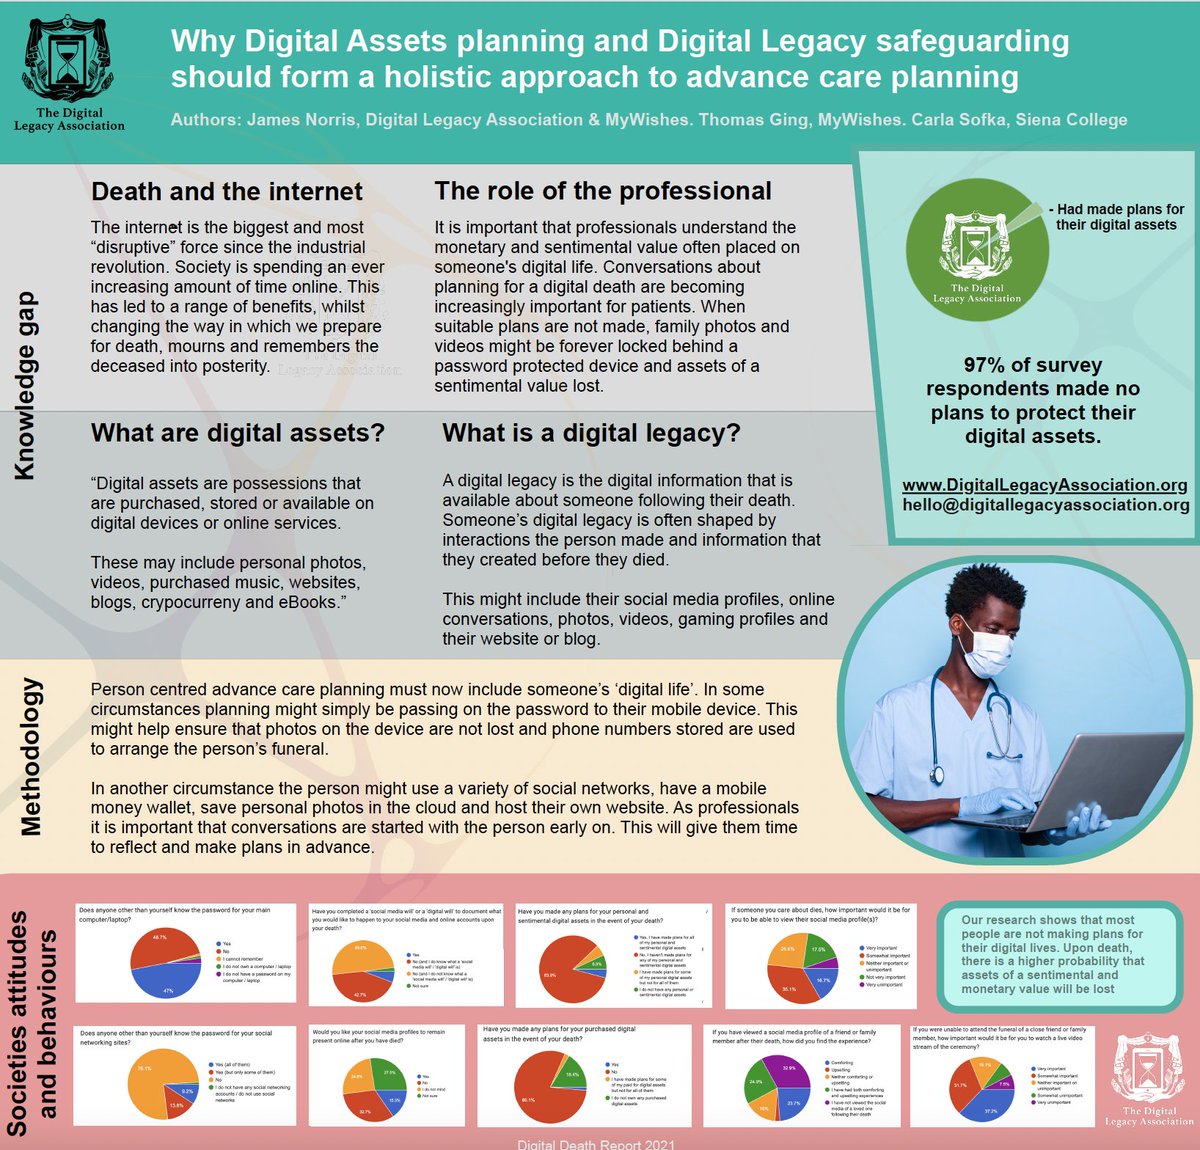 @ProfMarkTaubert Correct link: rcp.ac.uk/news-and-media… 

... Our Digital Legacy is becoming increasingly important...From a Palliative Care professionals stance, 'Digital Assets Planning and Digital Legacy Safeguarding should form a holistic approach to Advance Care Planning. #EAPC2024